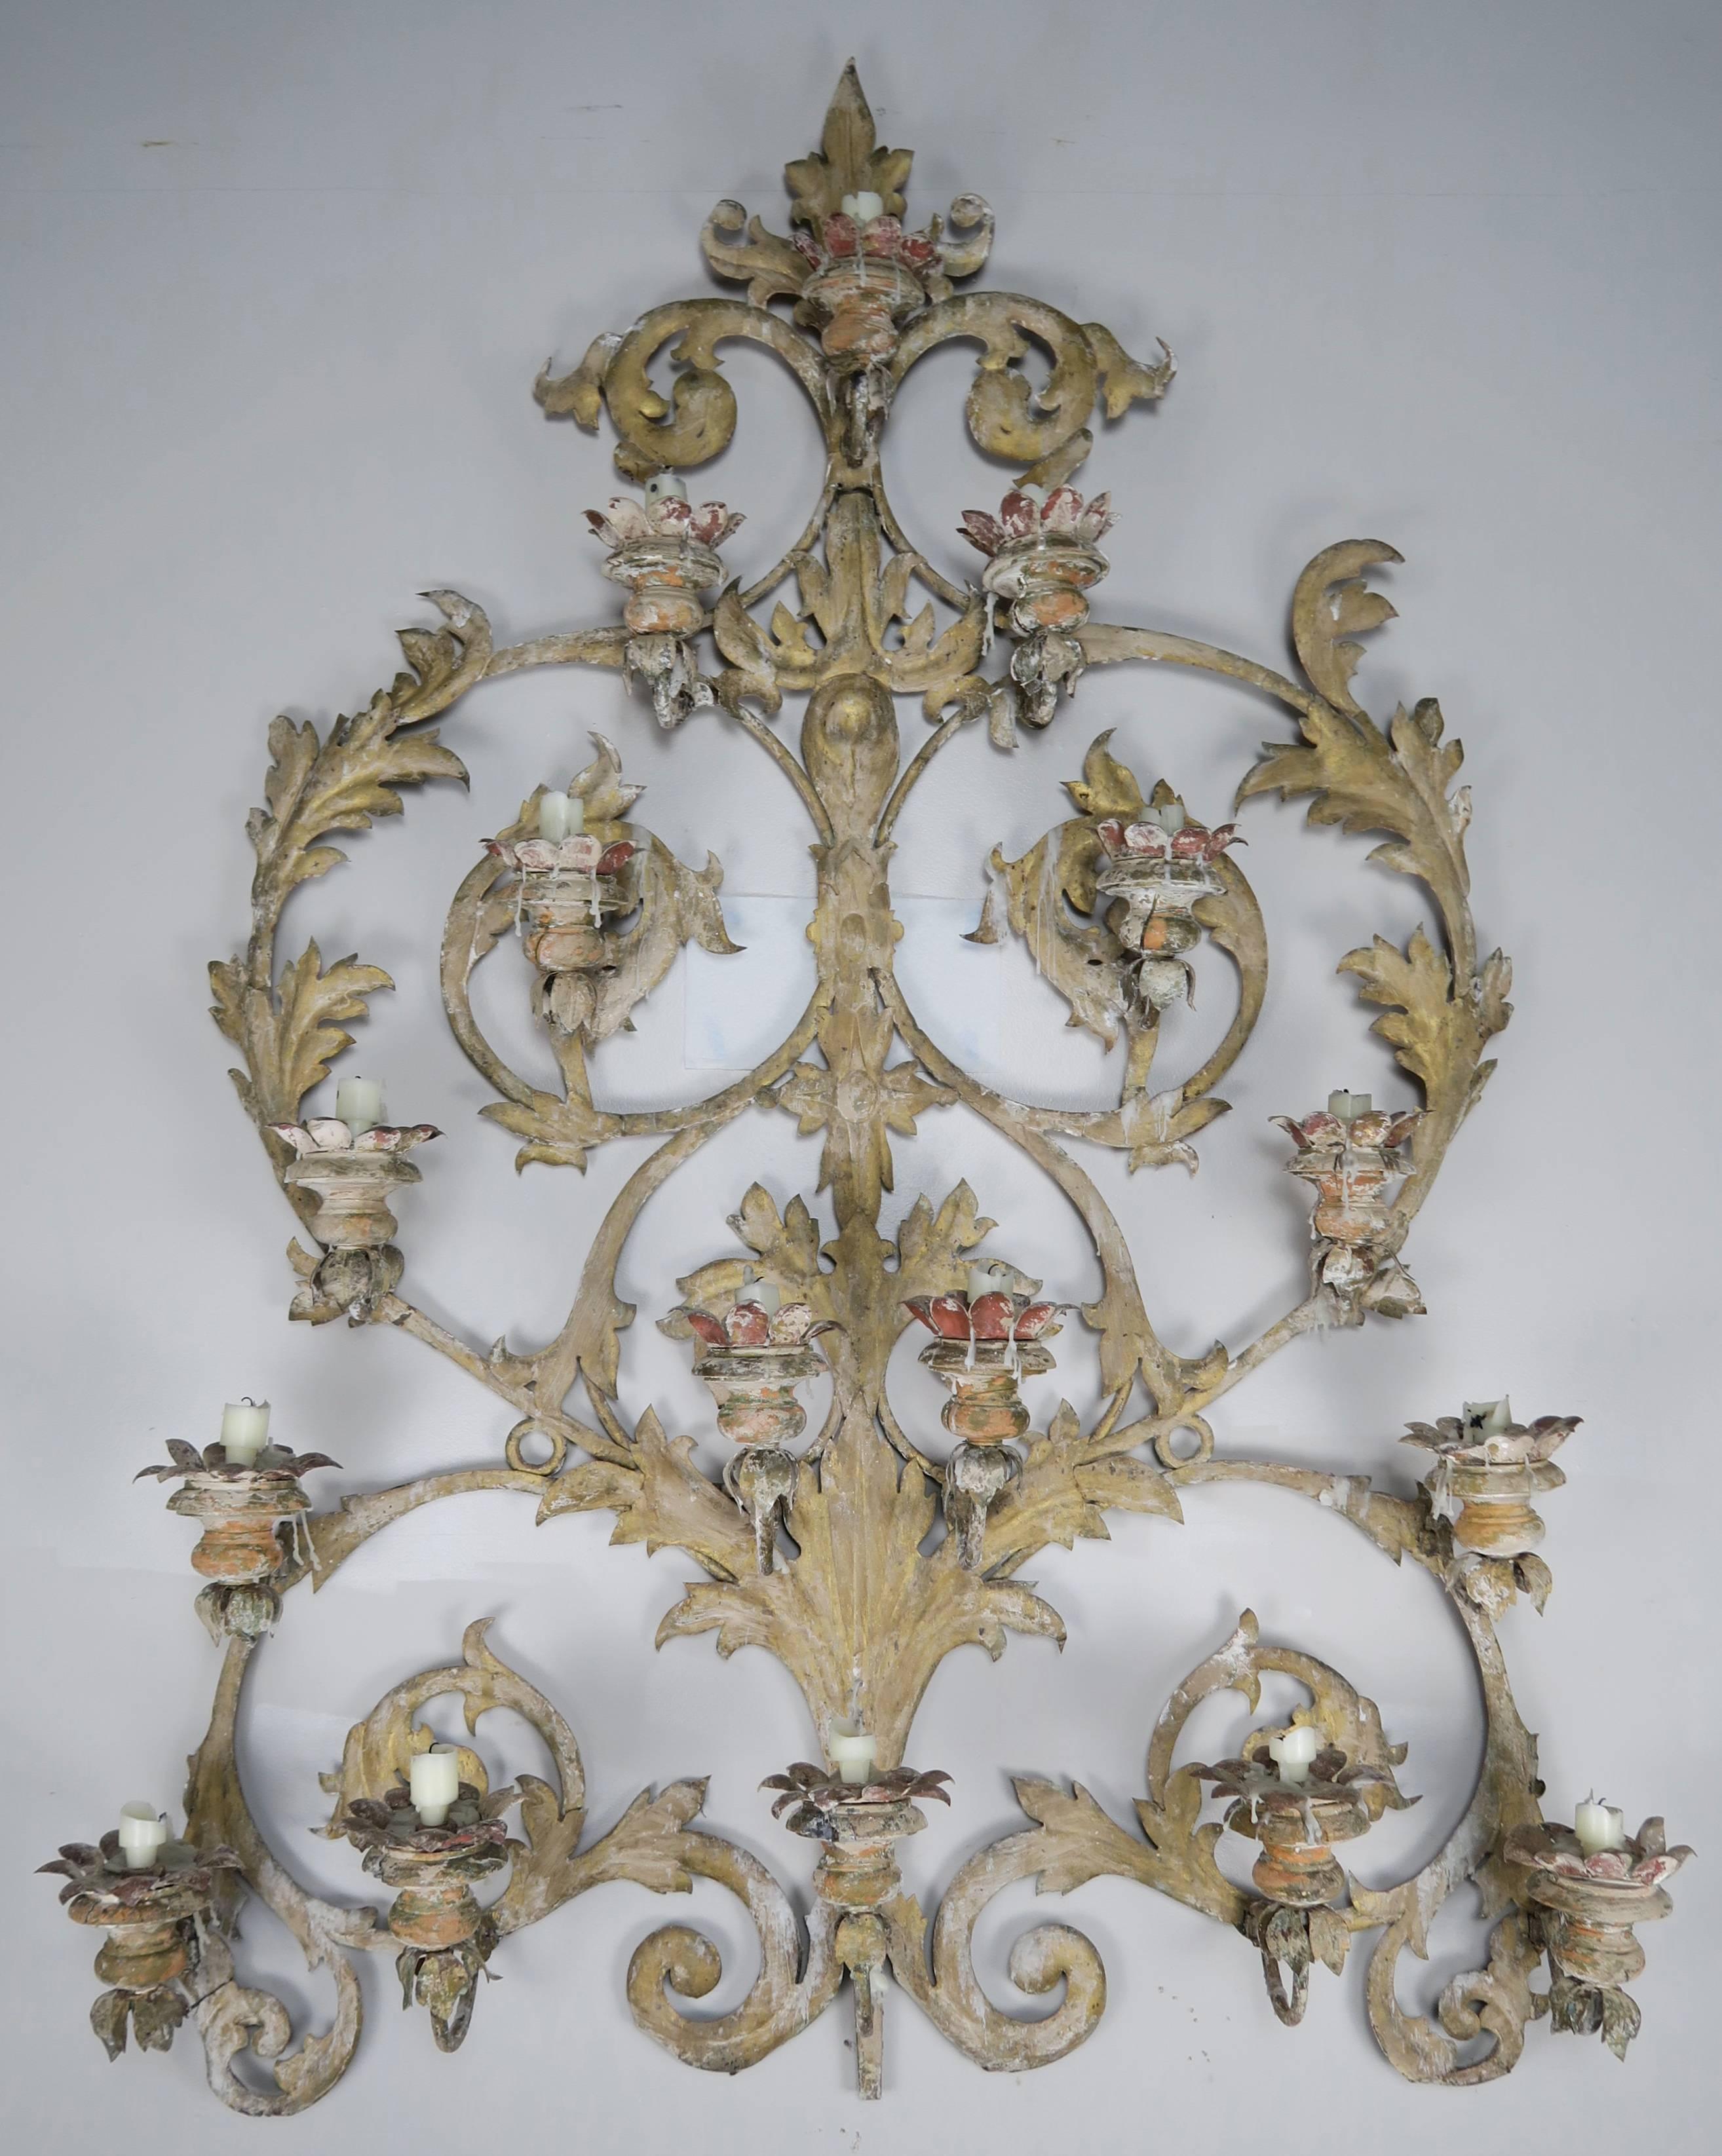 Italian 19th century 16-light painted iron and wood candelabra style wall ornament for candles. This fabulous one-of-a-kind unique piece is made up of 16 wooden and iron bobeches that hold candles in place. Swirling acanthus leaves throughout. A